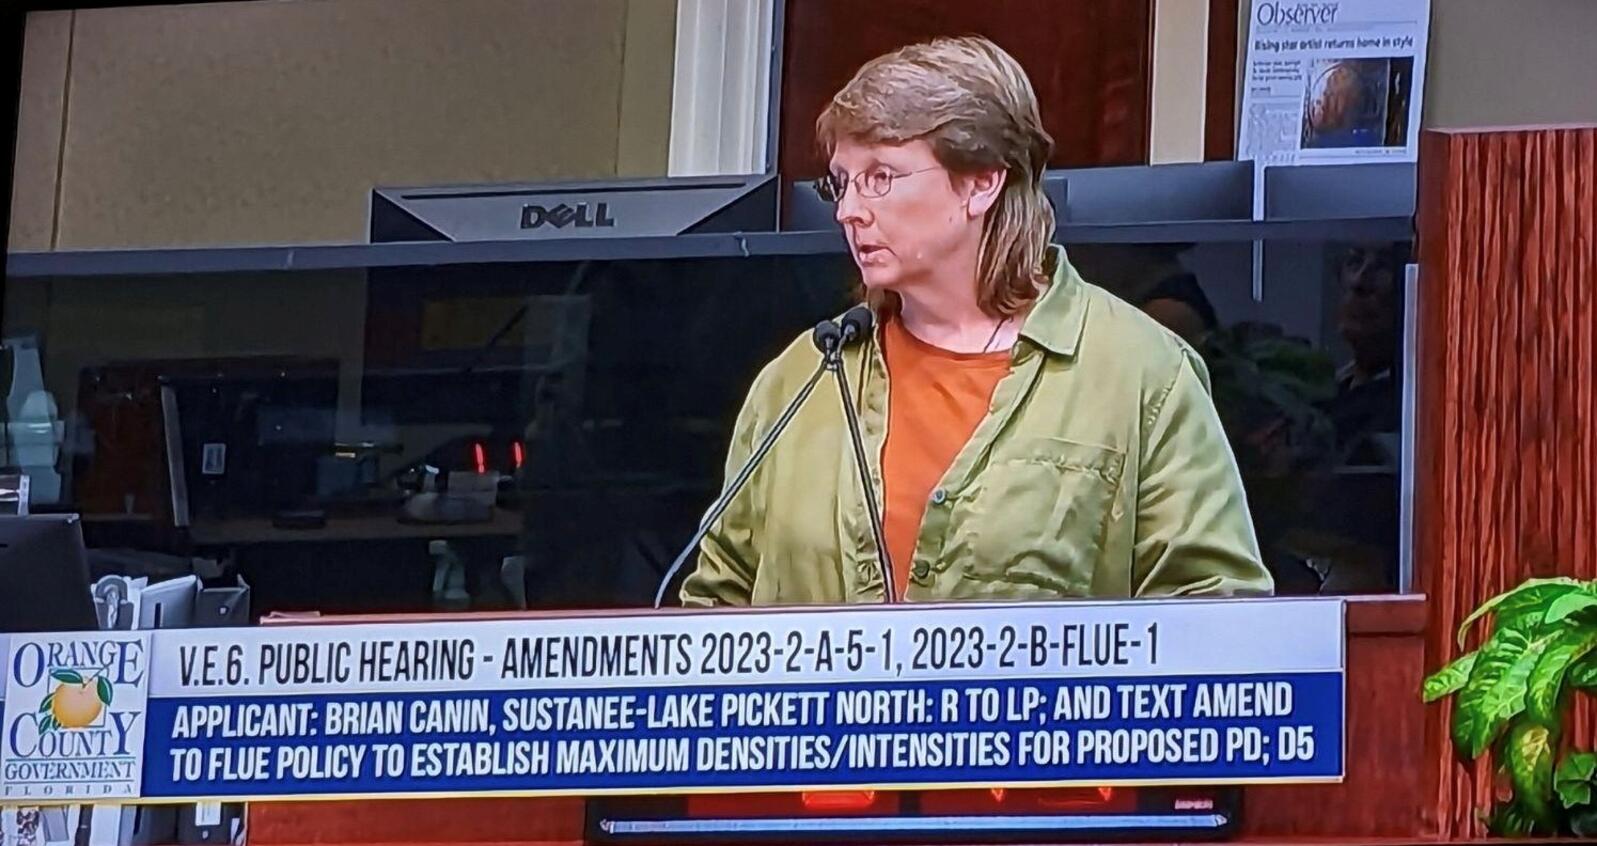 A screenshot of a televised county commission meeting where a woman is speaking.